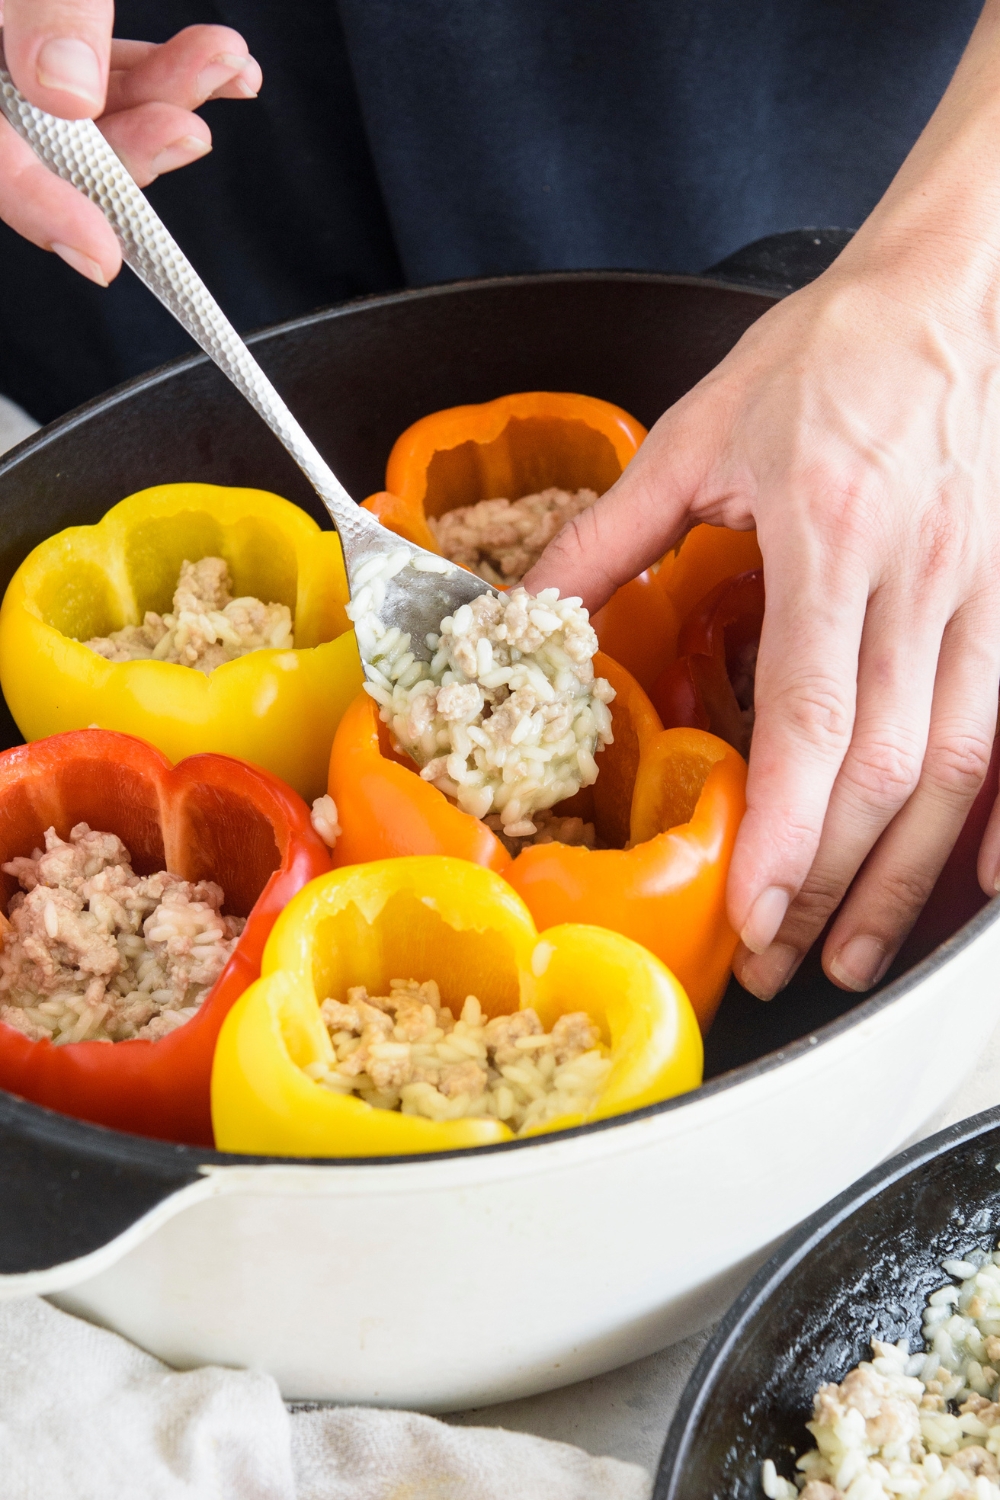 A person using a spoon to stuff bell peppers with a rice and ground meat mixture.